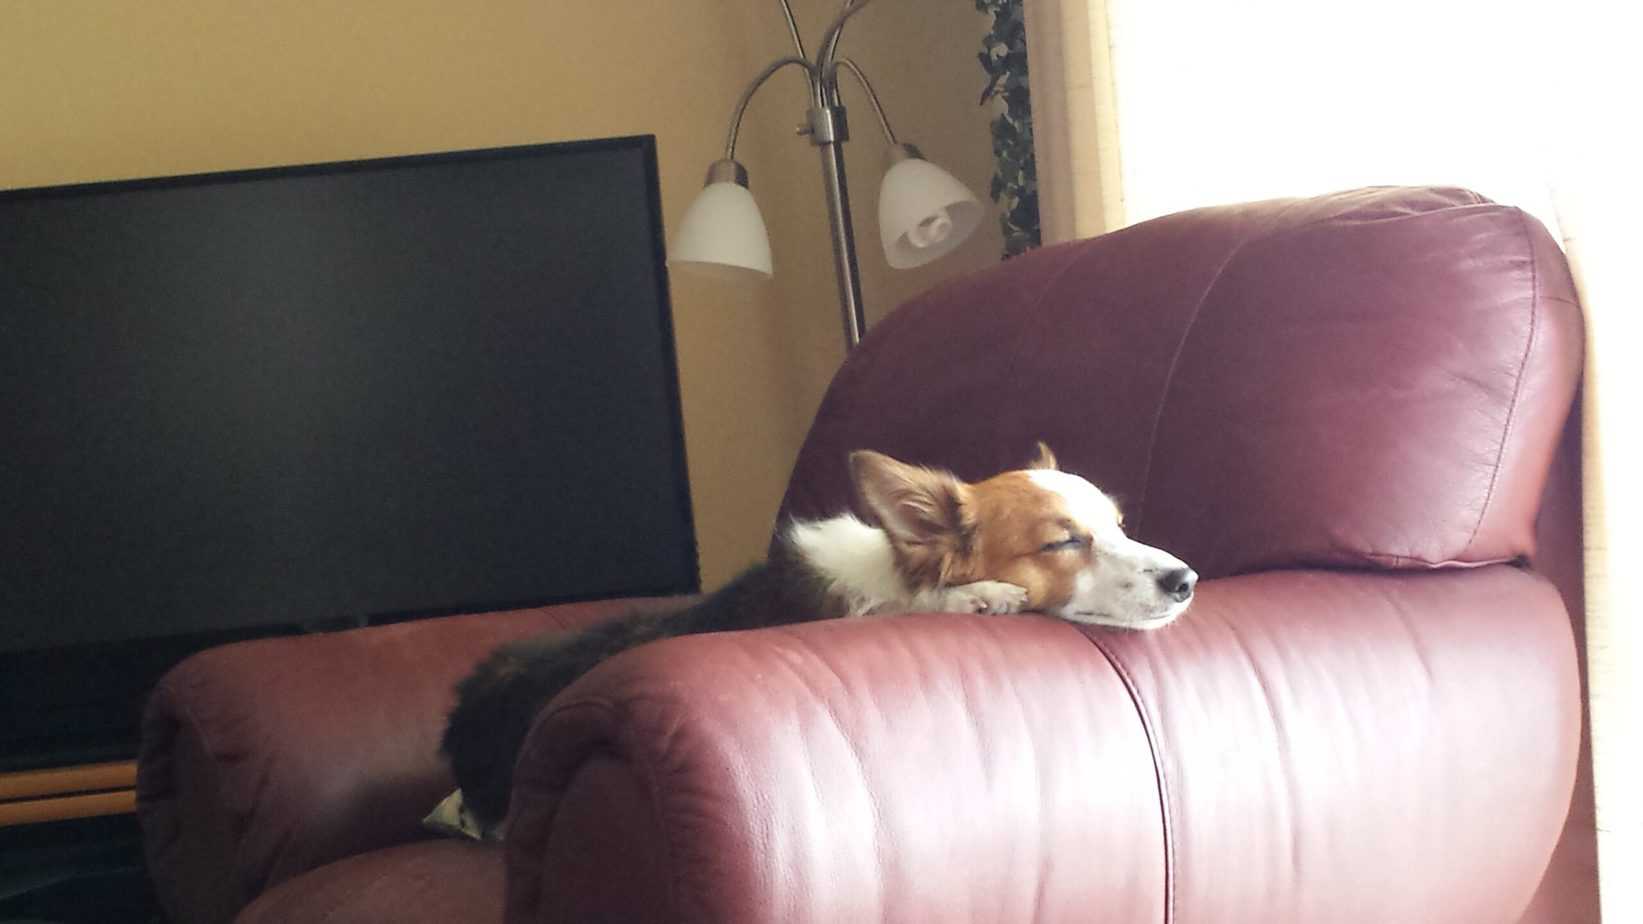 Dog sleeping on a couch